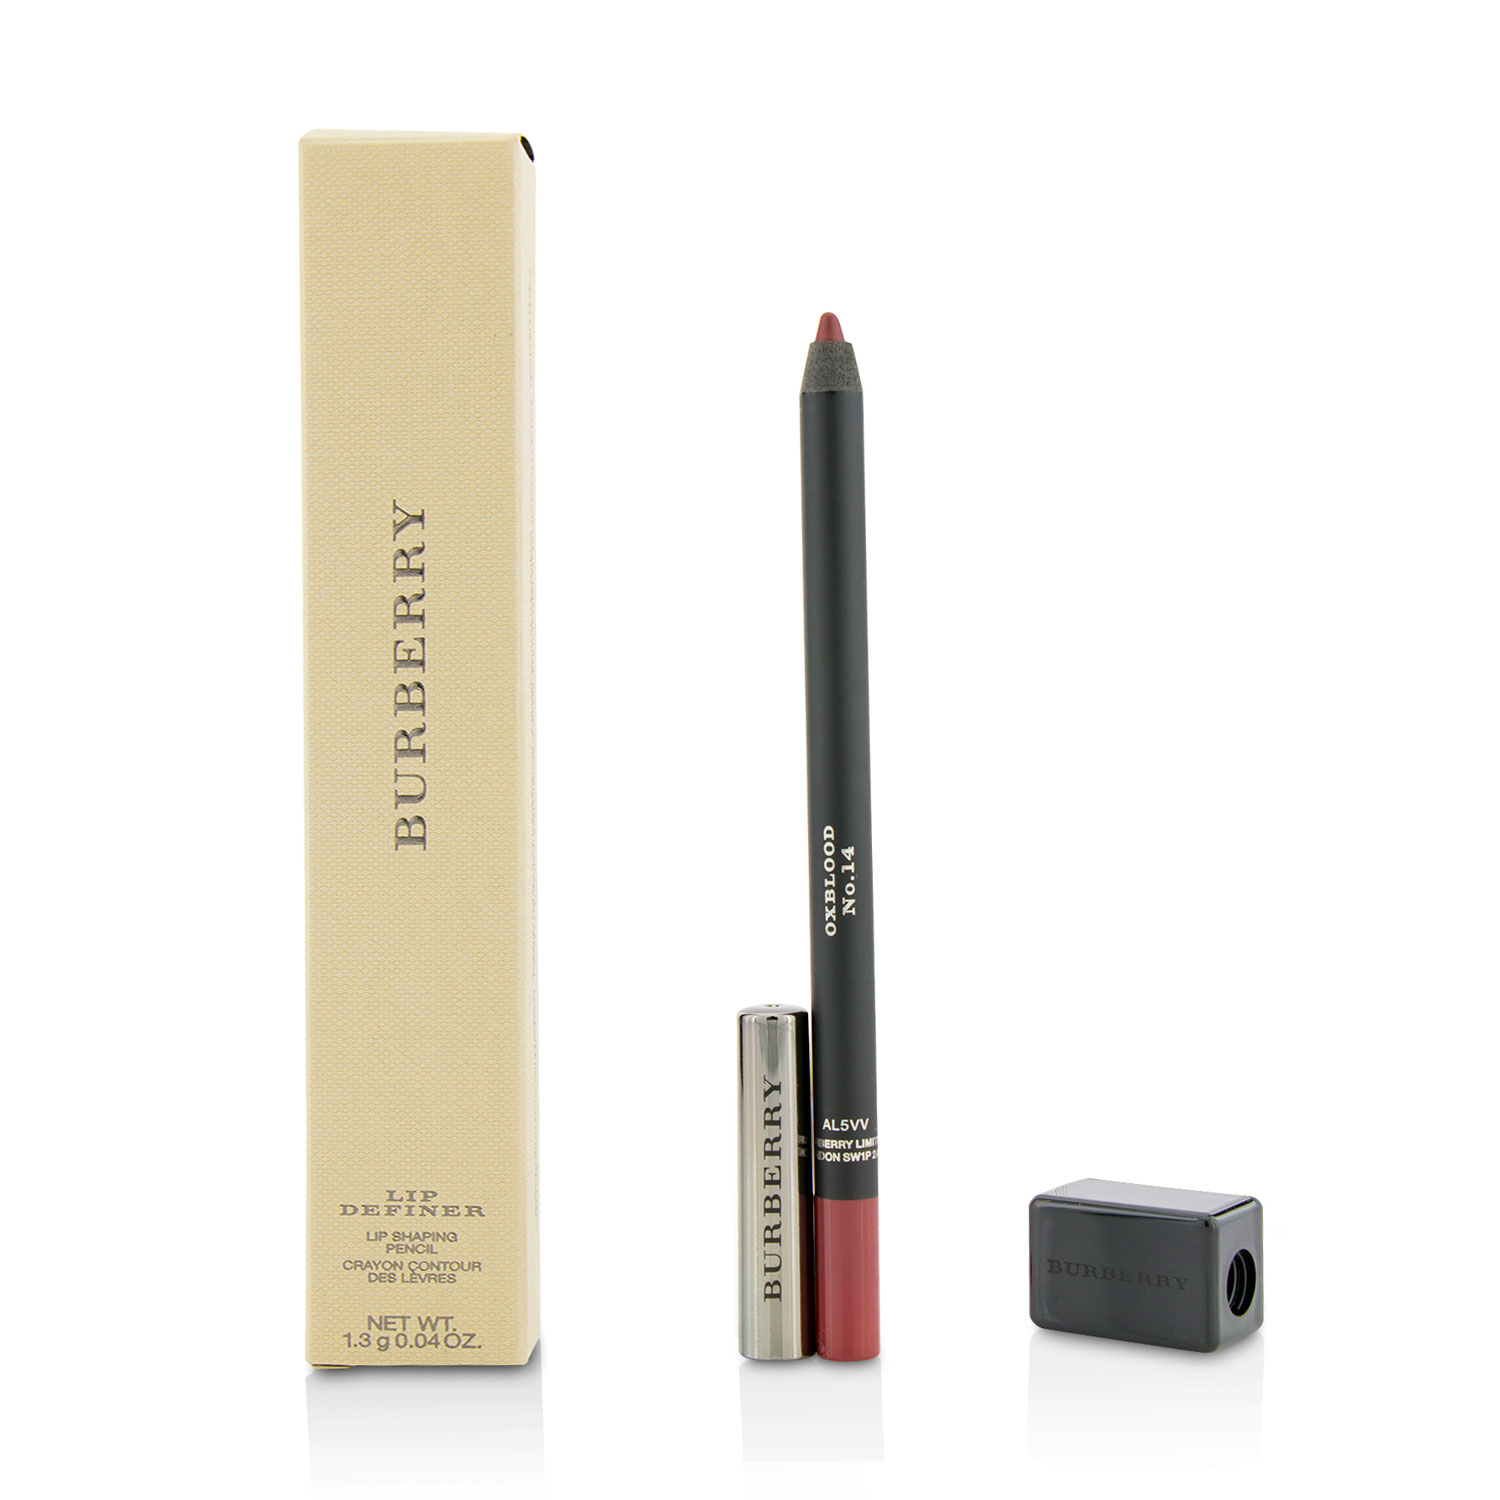 Lip Definer Lip Shaping Pencil With Sharpener - # No. 14 Oxblood Burberry Image